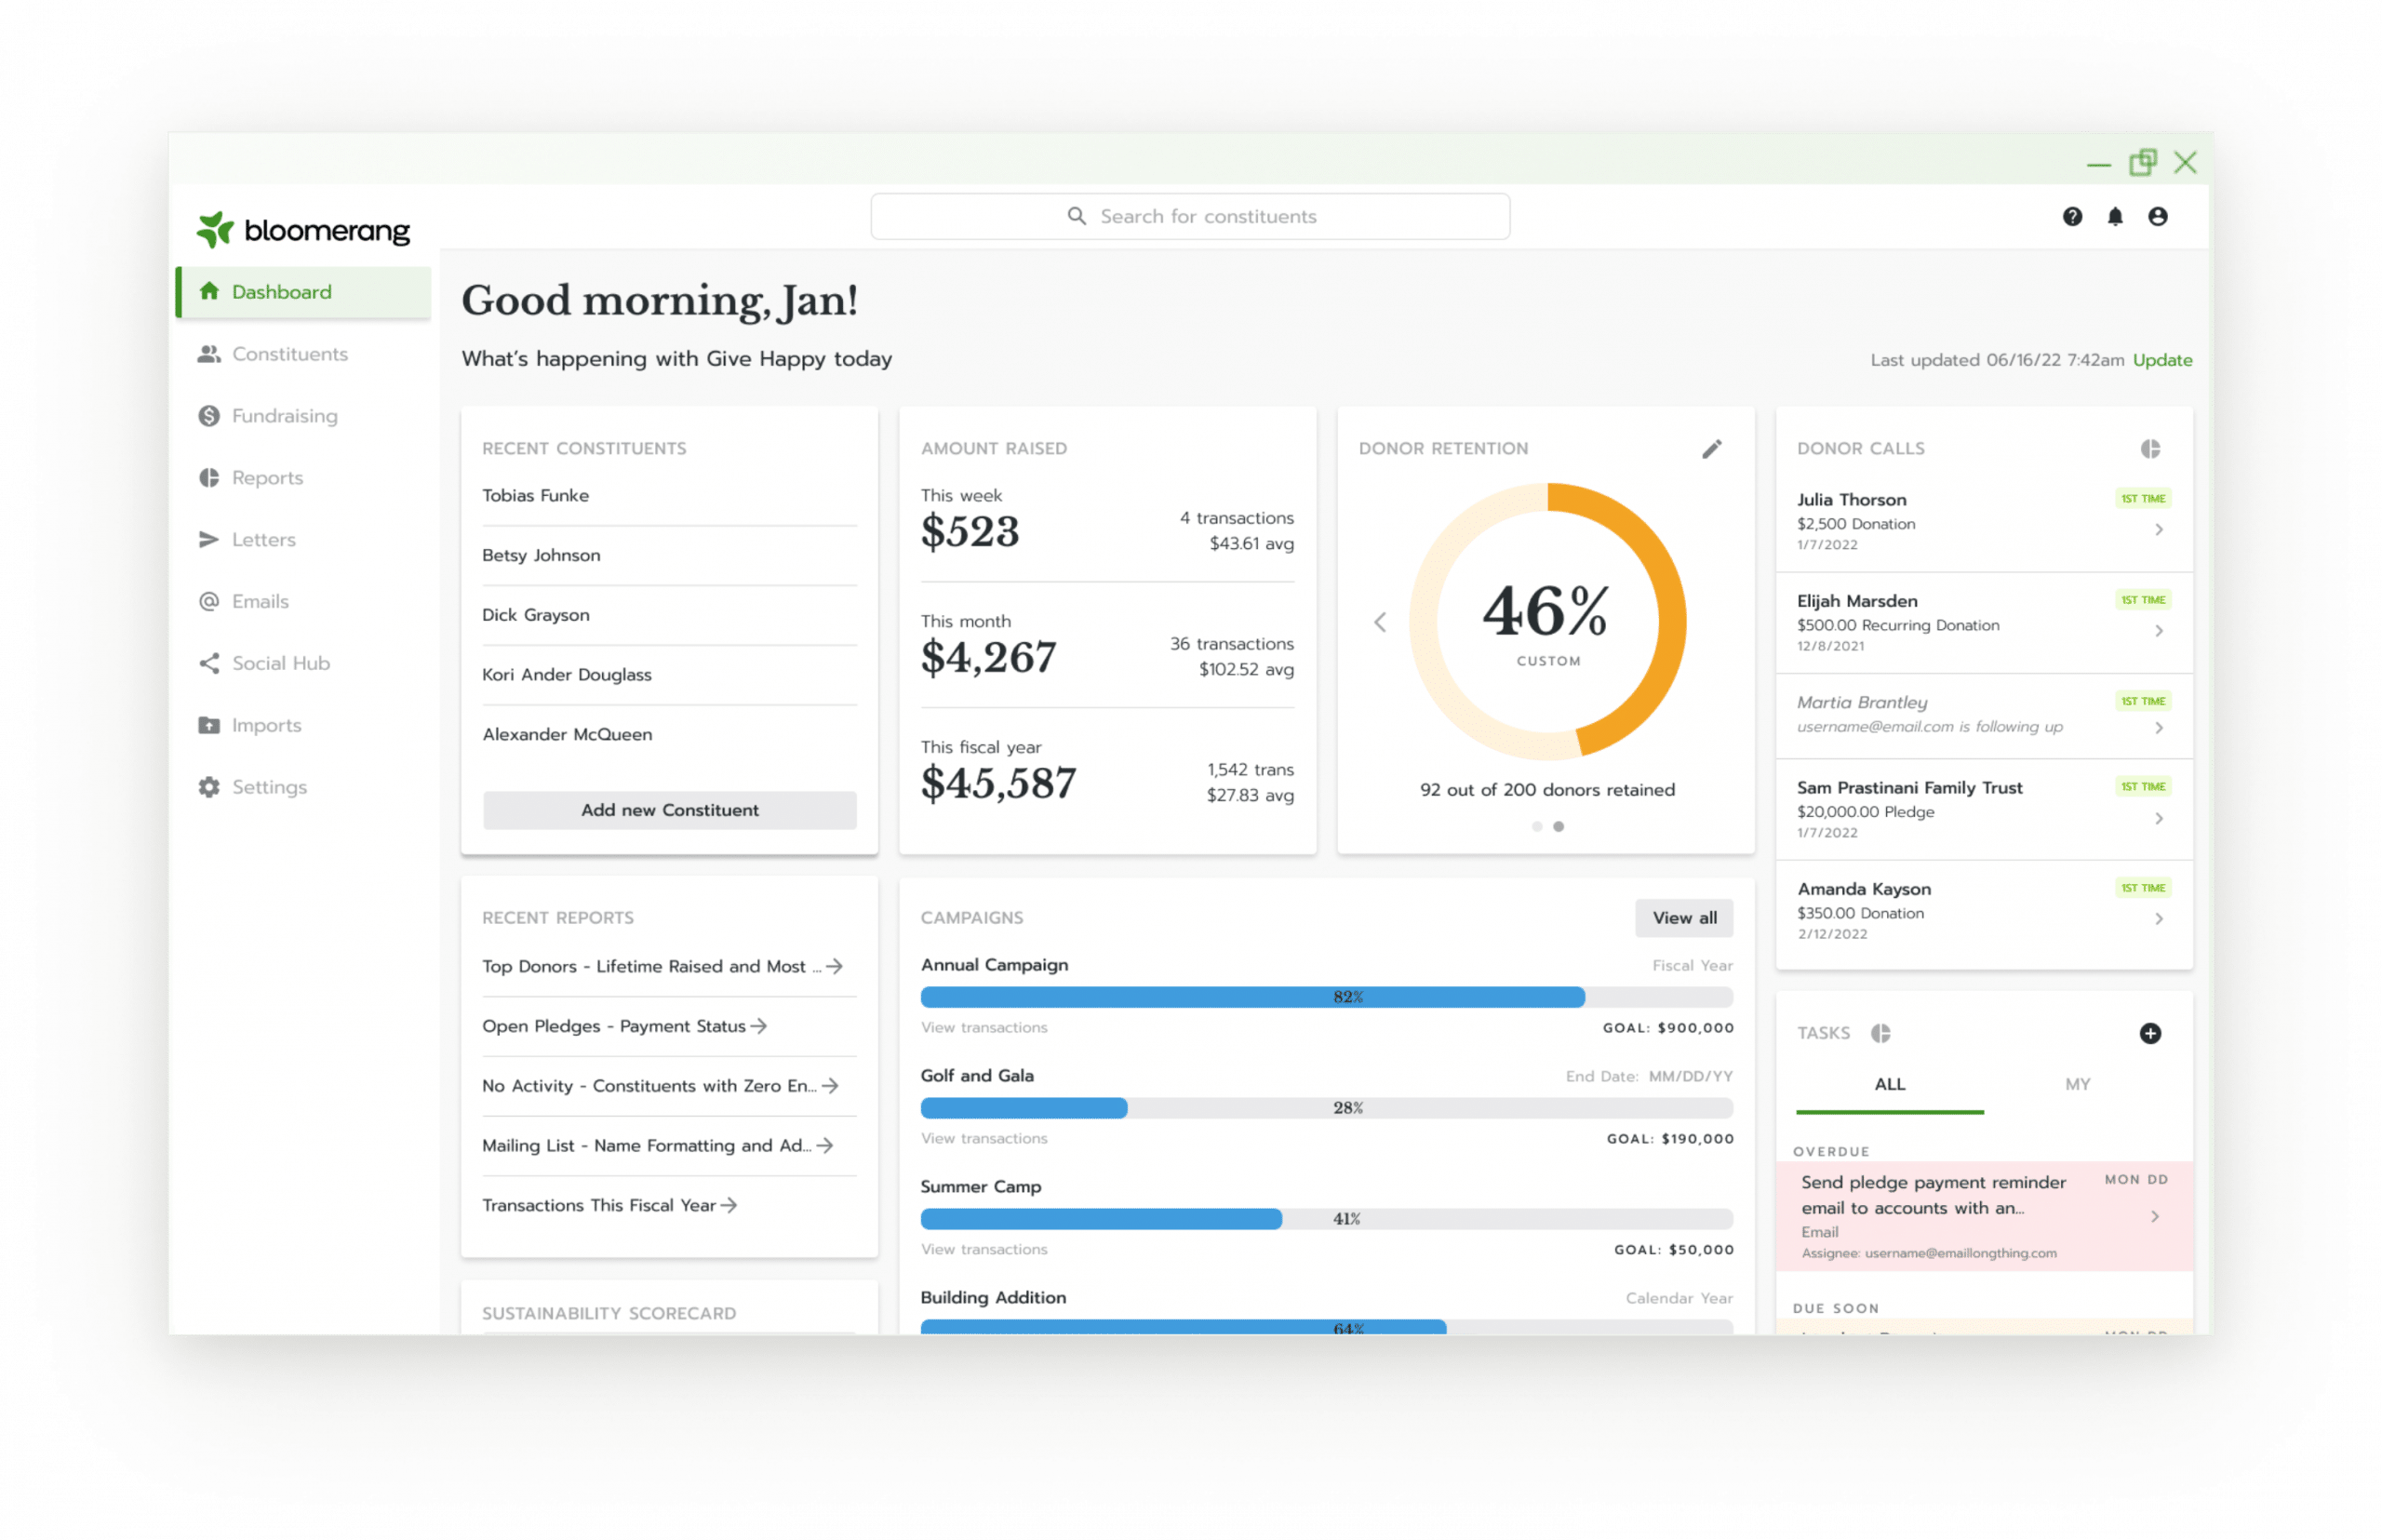 This is a screenshot of Bloomerang's online fundraising software and donor management dashboard.